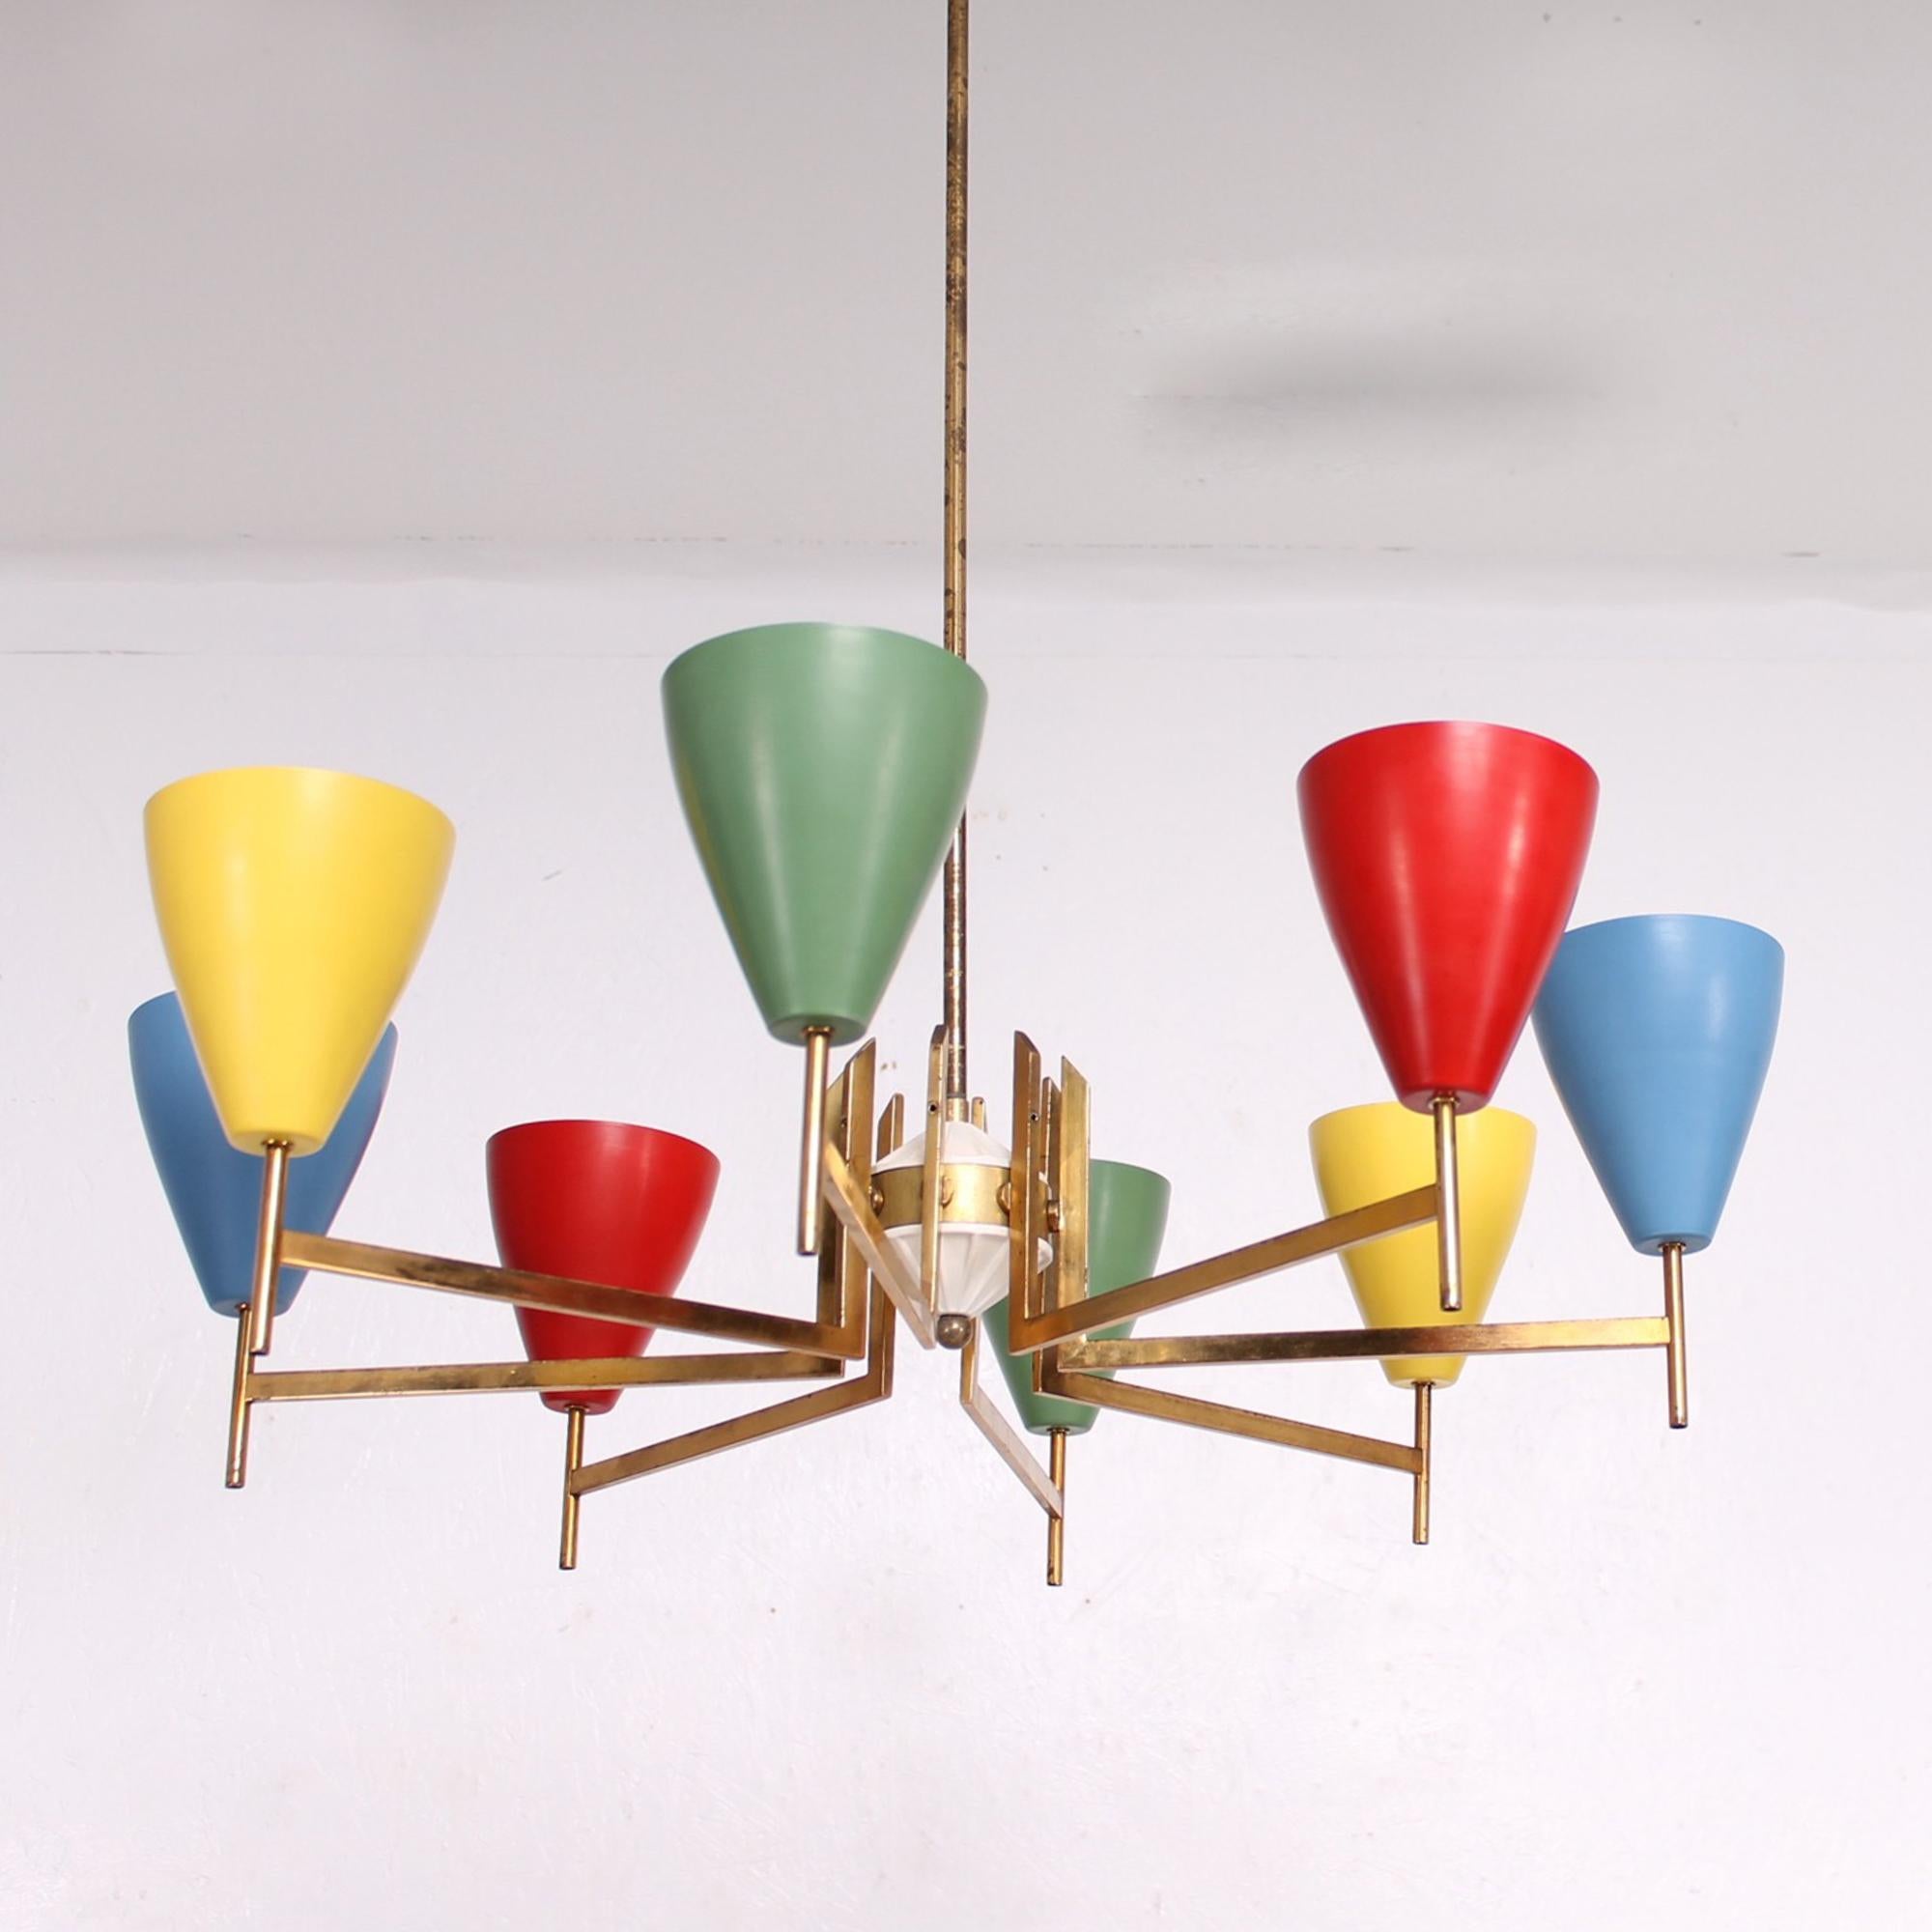 1950s Italian colorful Chandelier Pendant Lamp made in Italy.
Brass body with eight vibrant colors that scream fun!
Aluminum Shades of red green yellow & light blue.
It requires eight E-14 bulbs, not included.
No stamp. Attributed to Arredoluce.
28